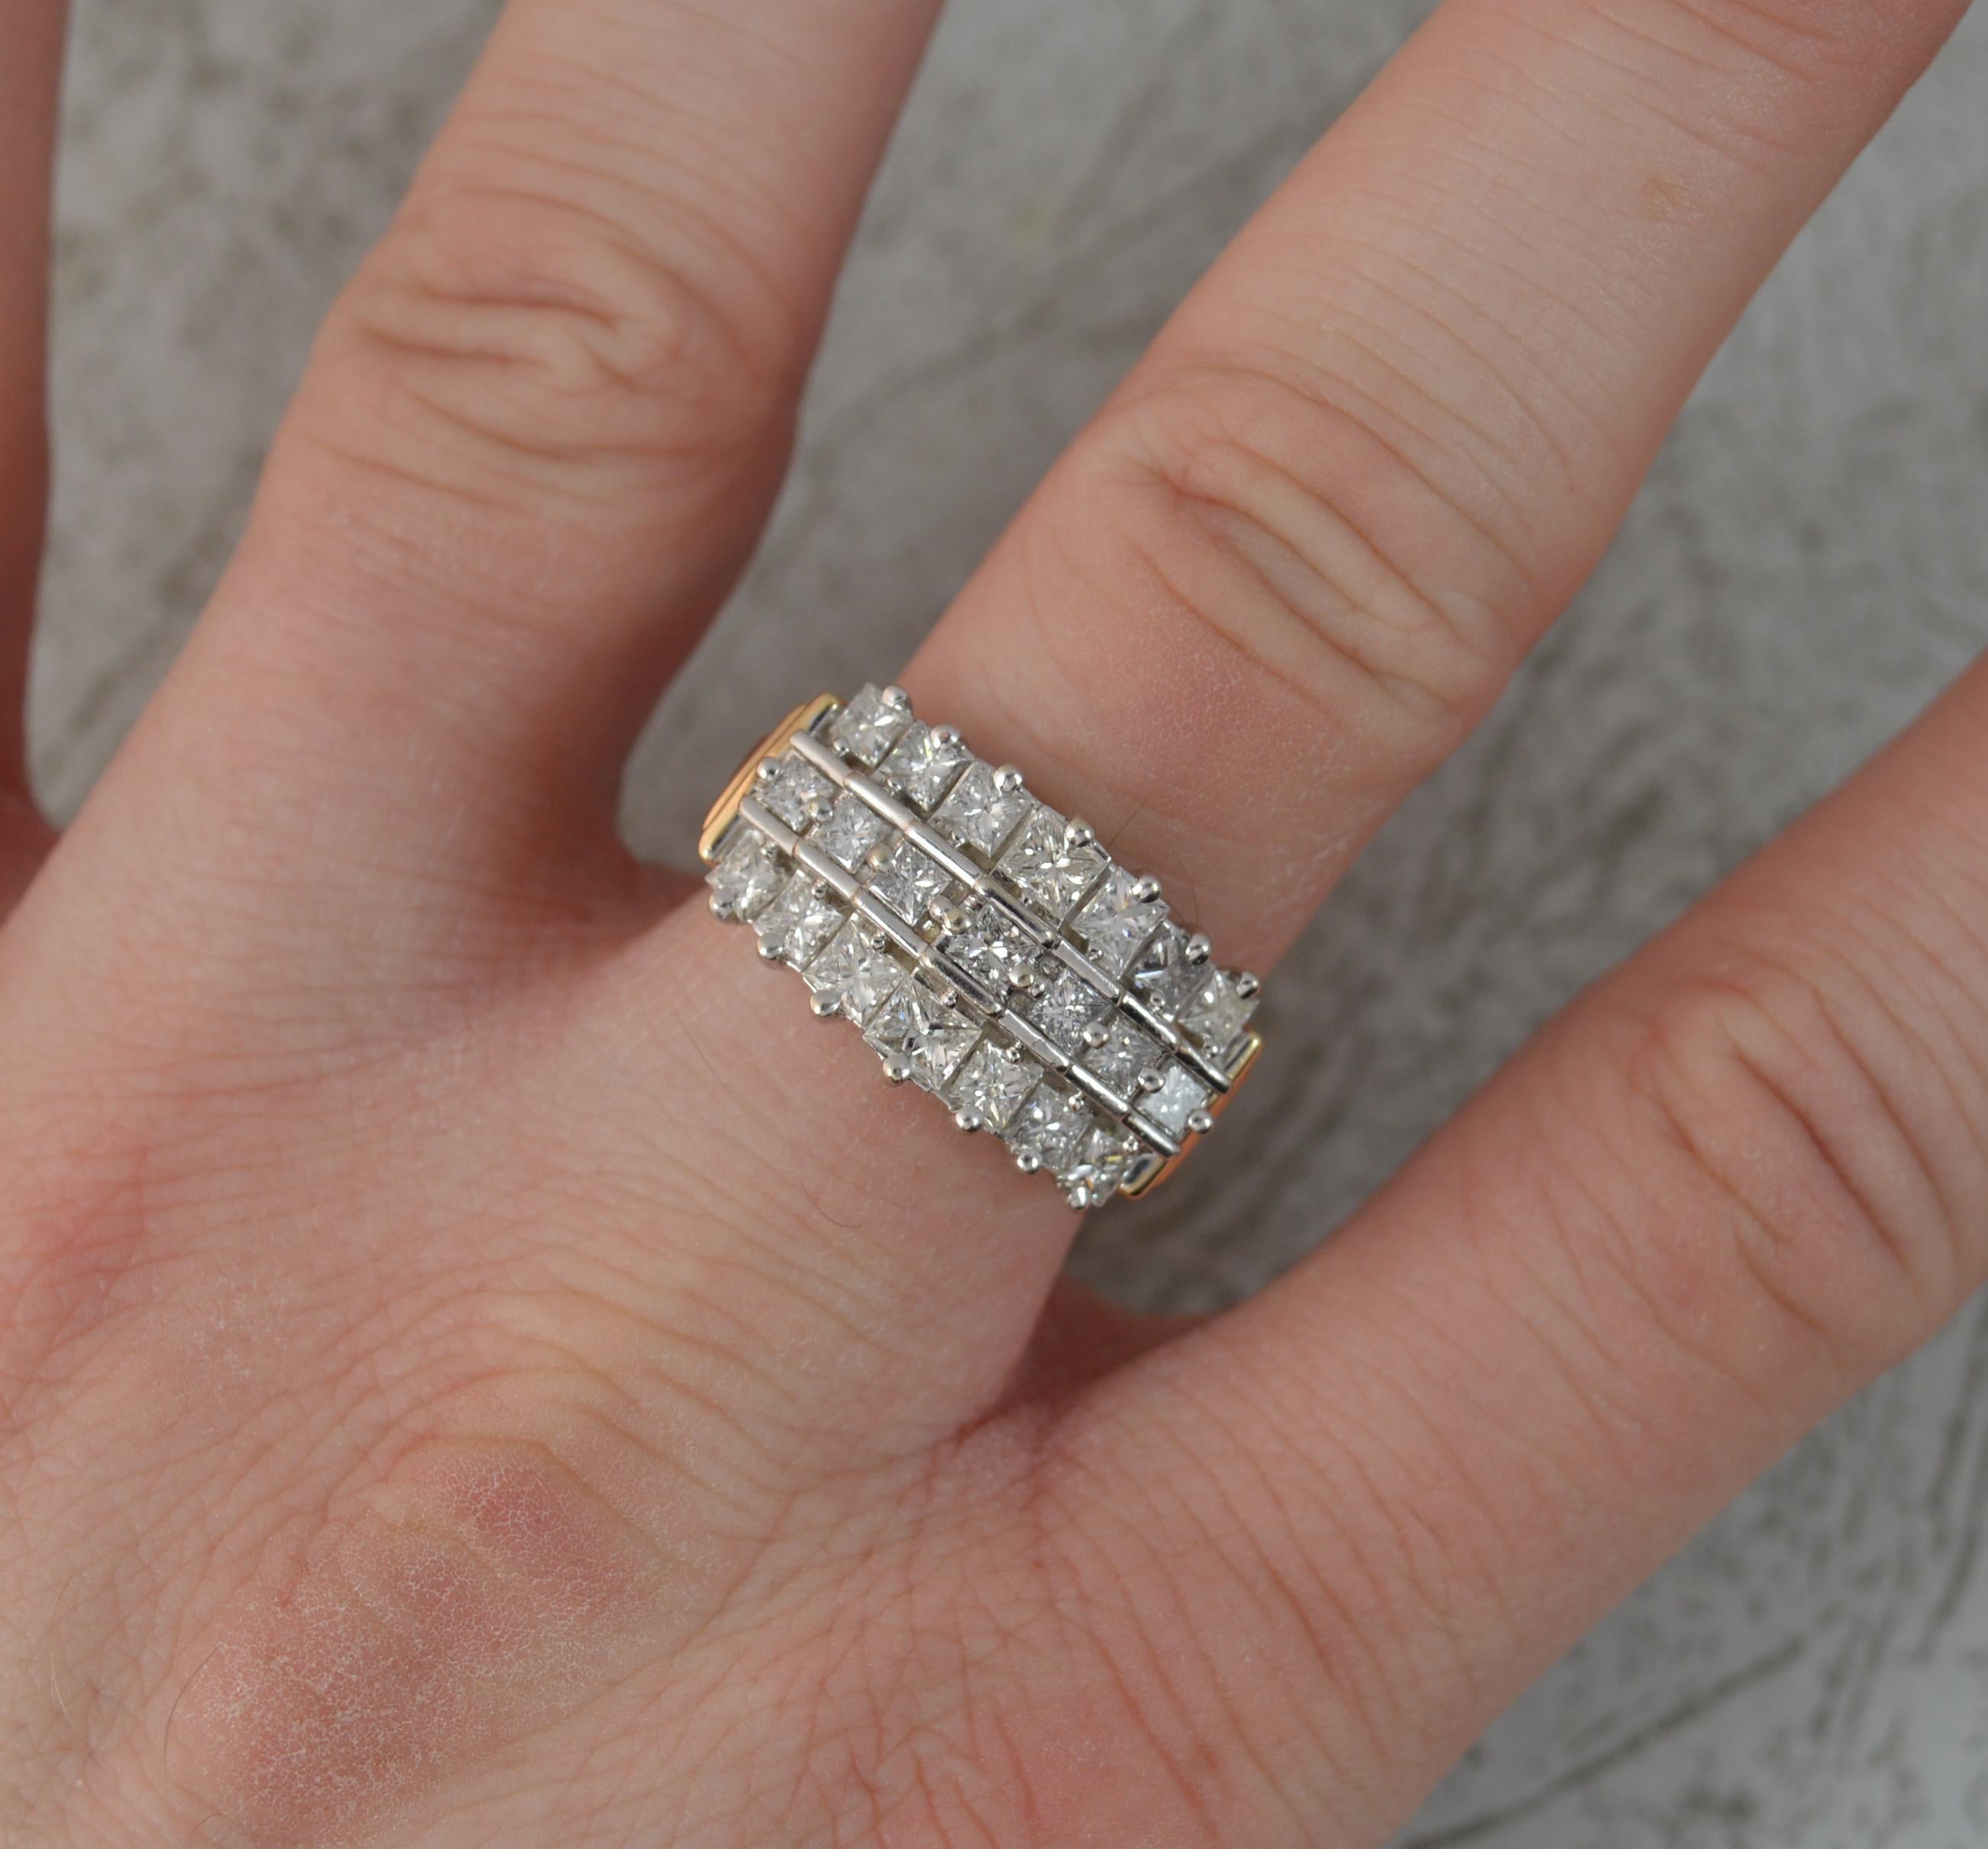 A stunning diamond cluster ring.
Solid 14 carat yellow gold example with white gold head setting.
A graduated or stepped cluster with three rows of princess cut diamonds. Approx 2.75 carats in total. Very clean, bright and sparkly.
20mm x 11mm